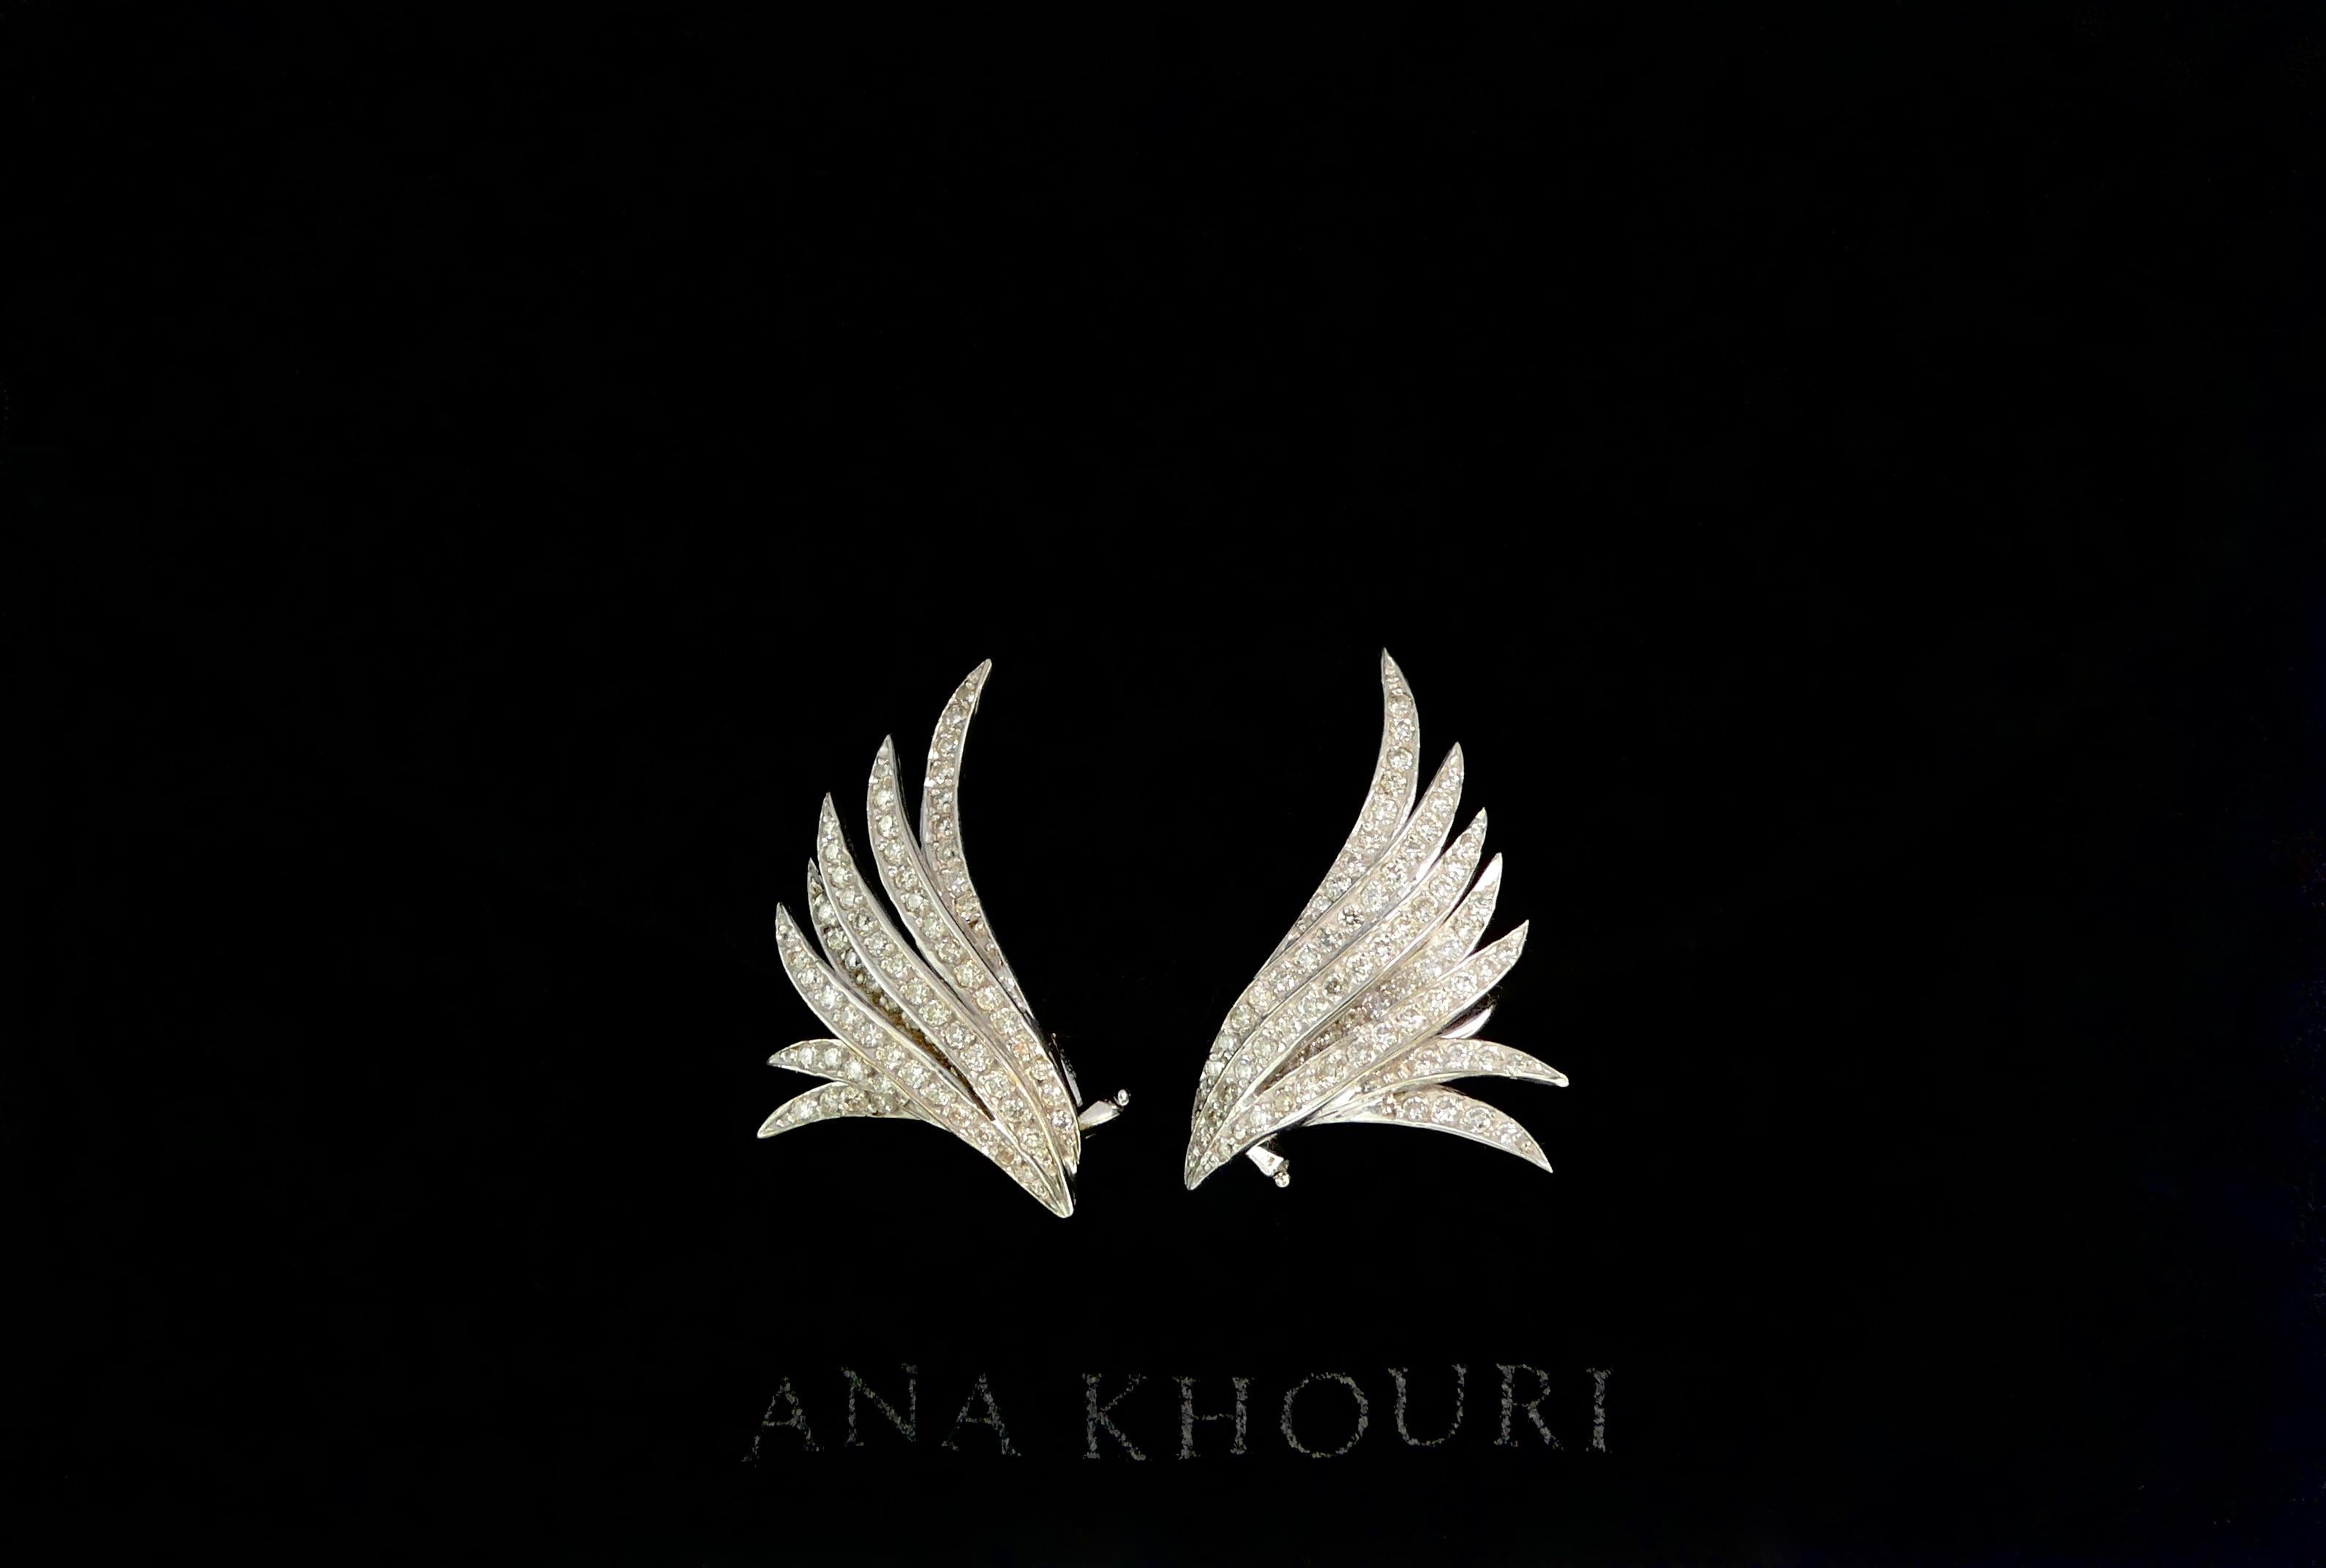 “Artist, Jeweller and Activist” is how Brazilian born Ana Khouri describes herself, and this message is embodied in every design. Her background as a painter and sculptor drives her down unexplored paths compared to other jewelers and her use of